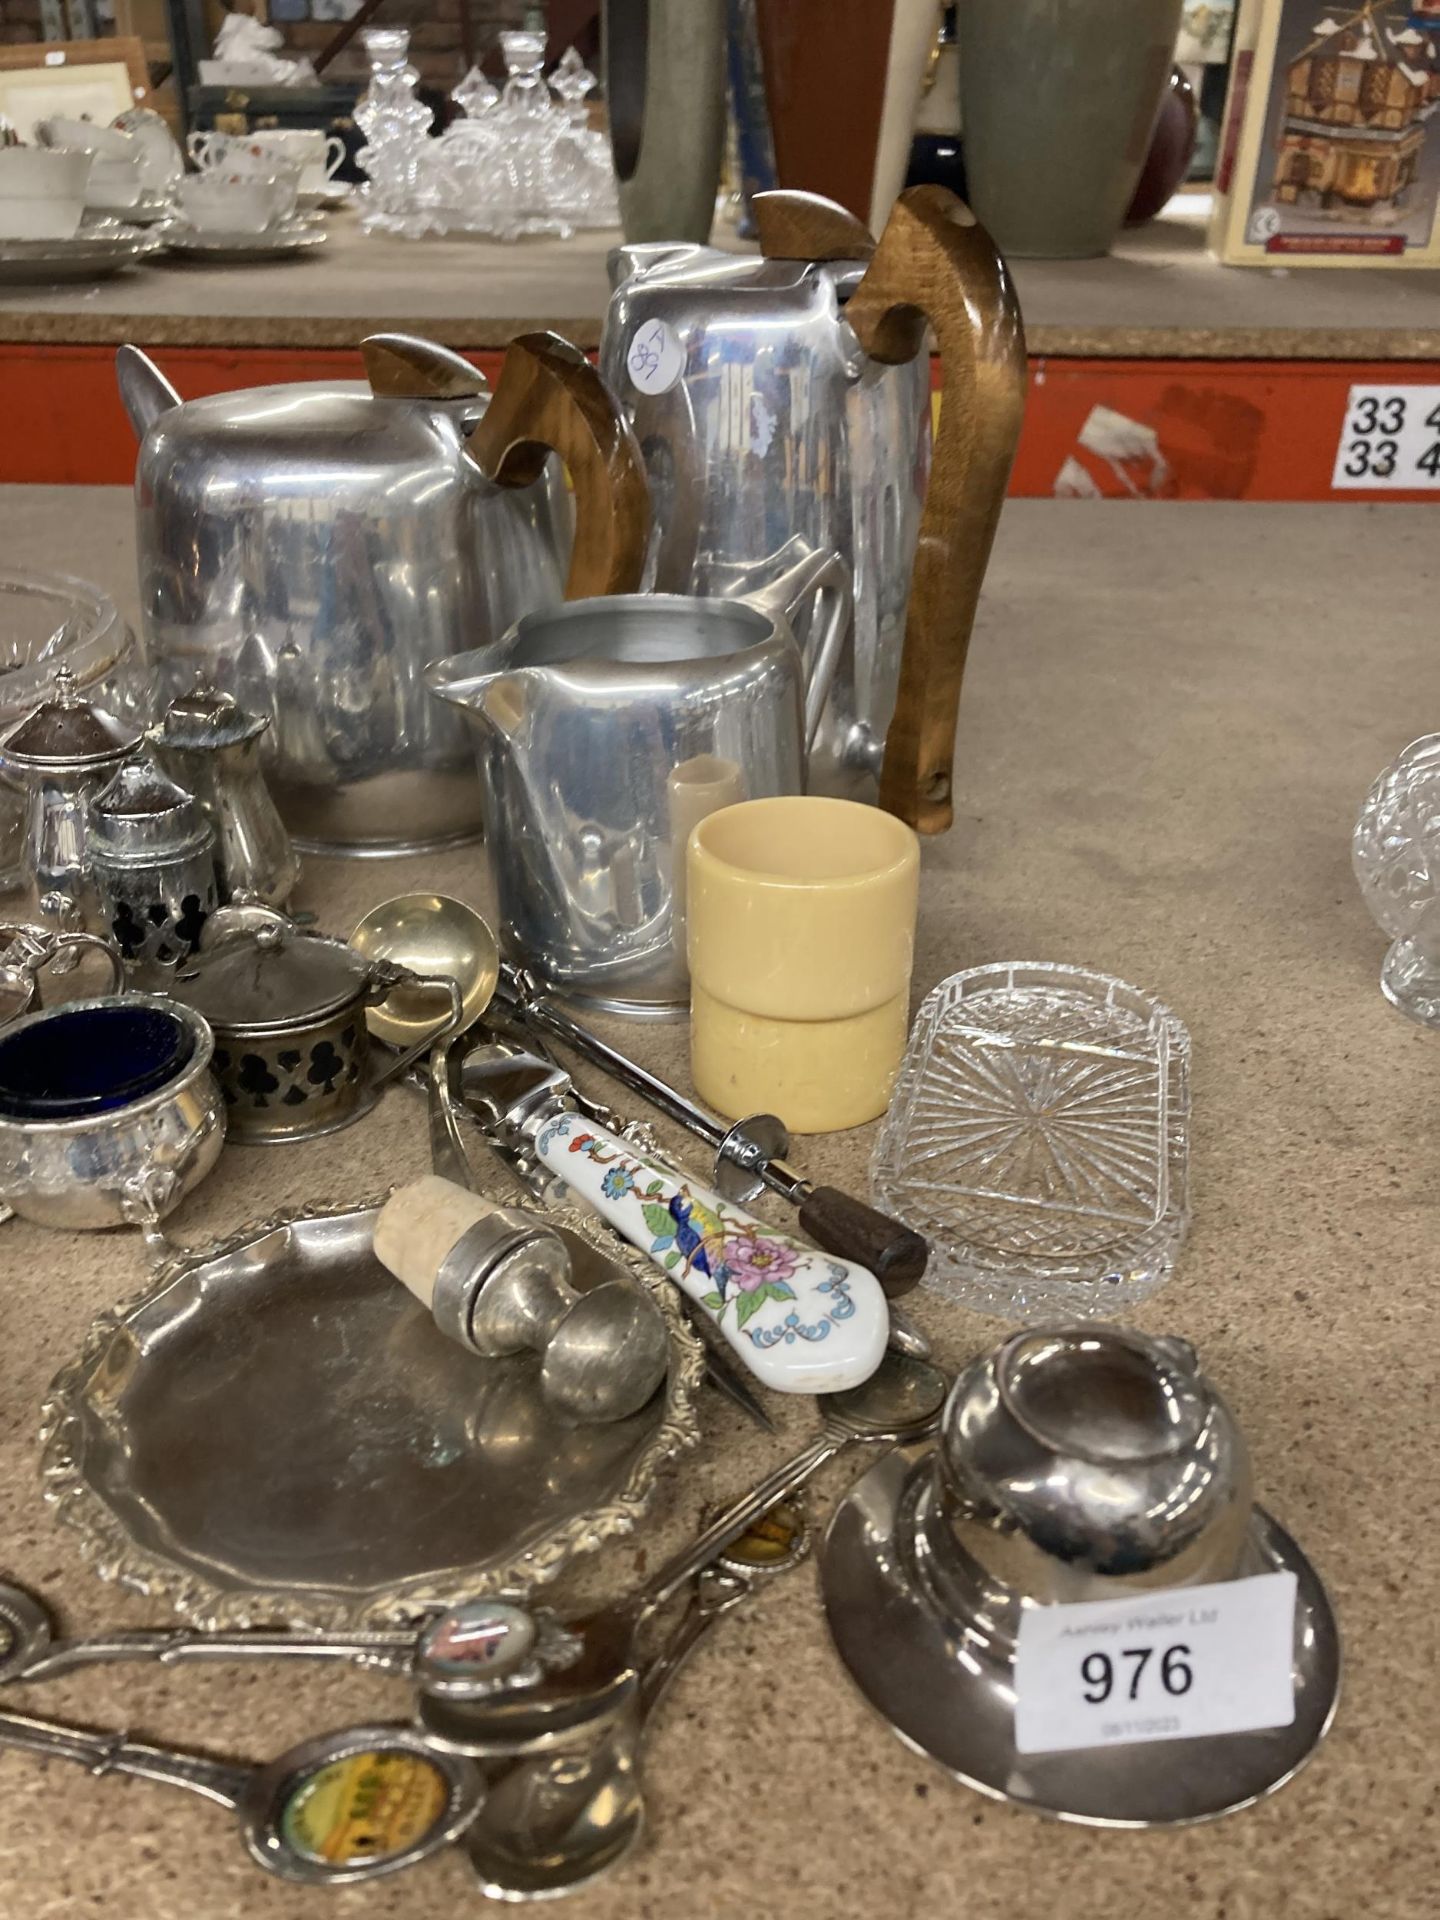 A MIXED VINTAGE LOT TO INCLUDE A PICQUOT WARE TEASET, NAPKIN RINGS, FLATWARE, SILVER PLATED - Image 2 of 4